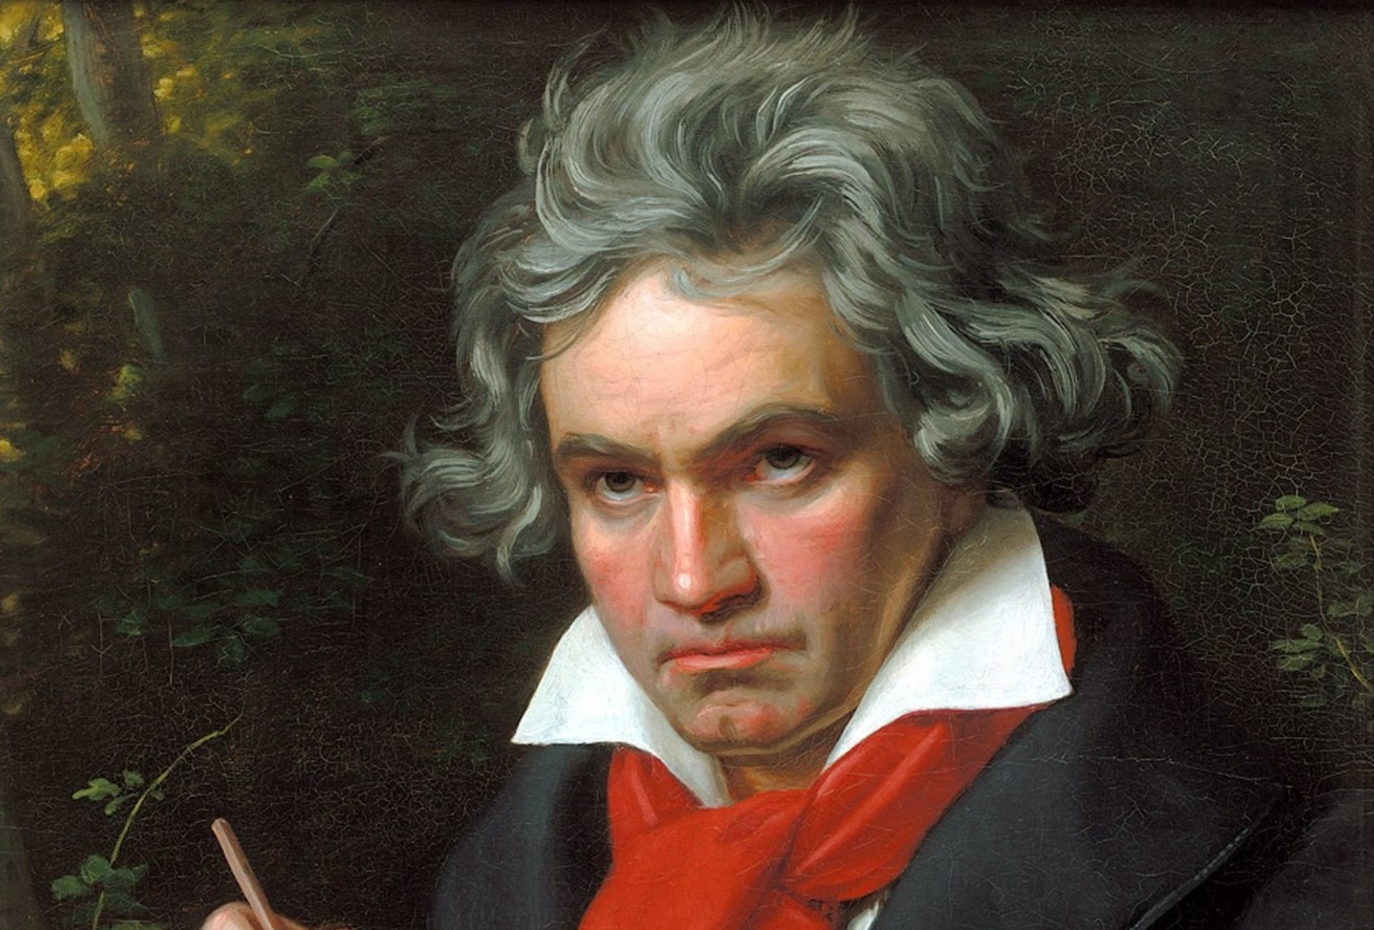 Classical composers